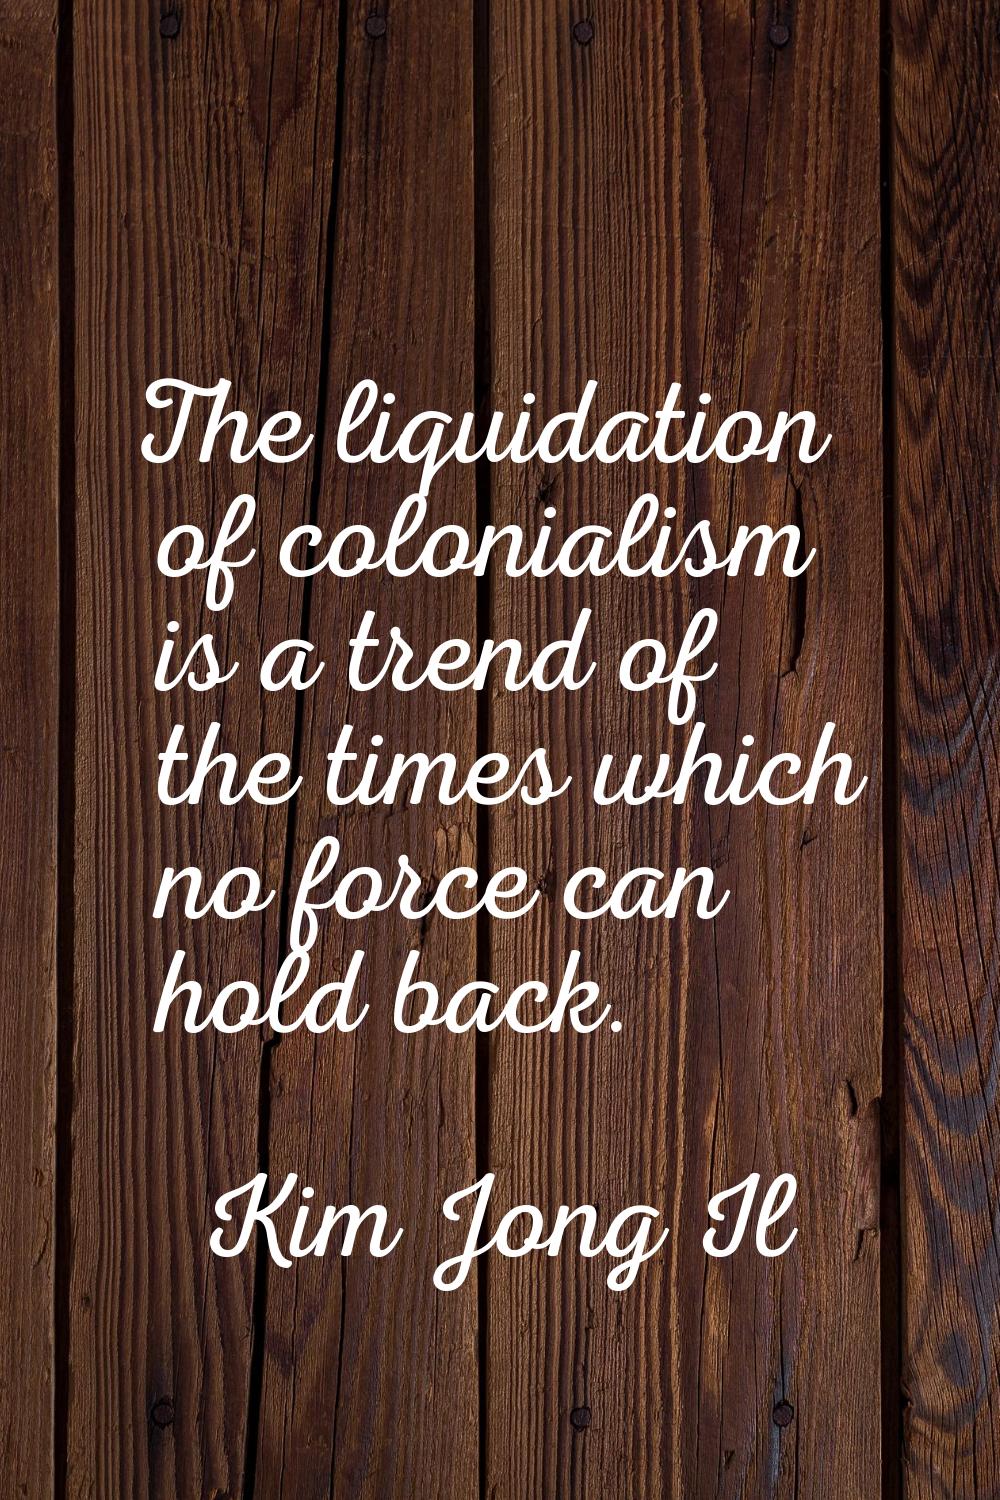 The liquidation of colonialism is a trend of the times which no force can hold back.